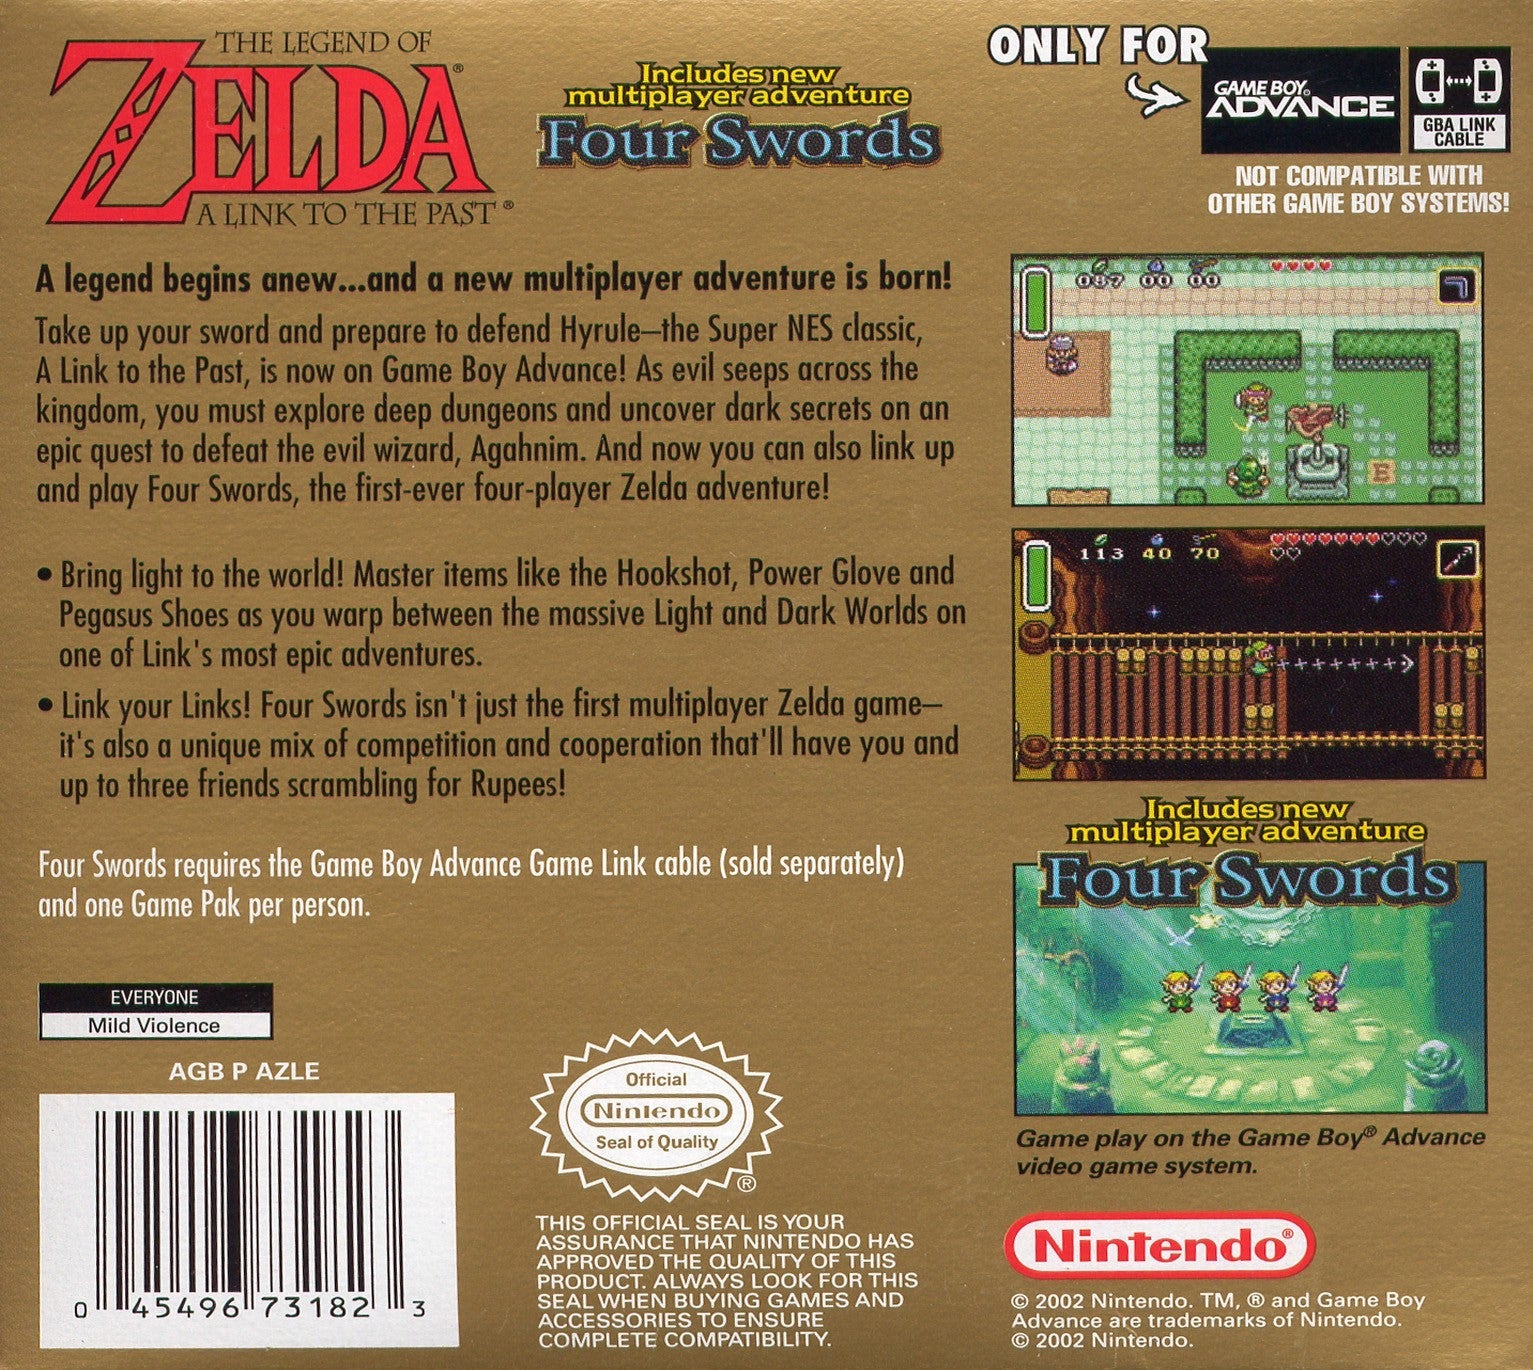  The Legend of Zelda: A Link to the Past (Includes Four